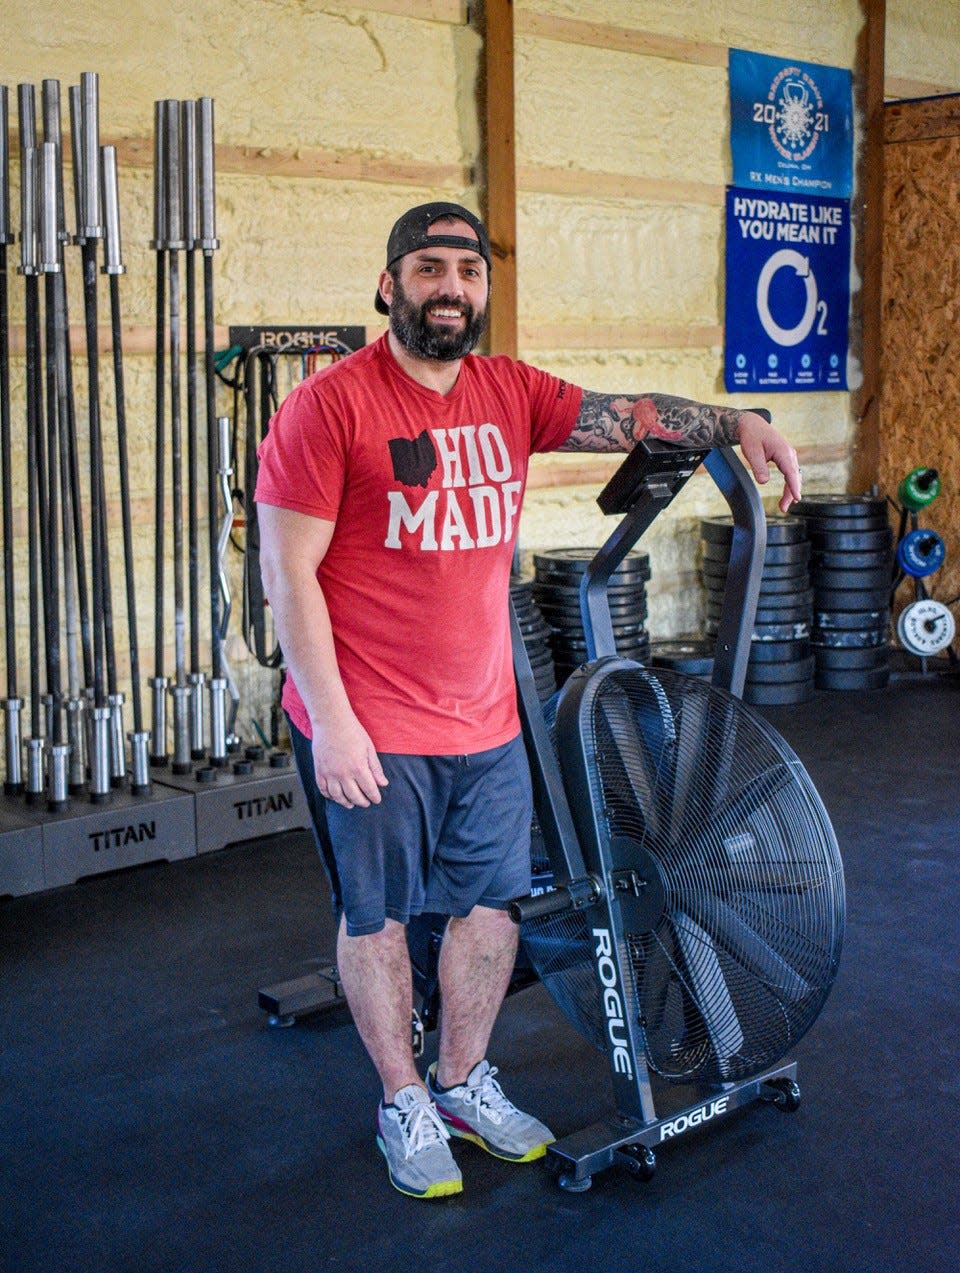 Clyde Union CrossFit offers a two-week free trial to allow potential clients to see just how far the program can take them on their fitness journey.